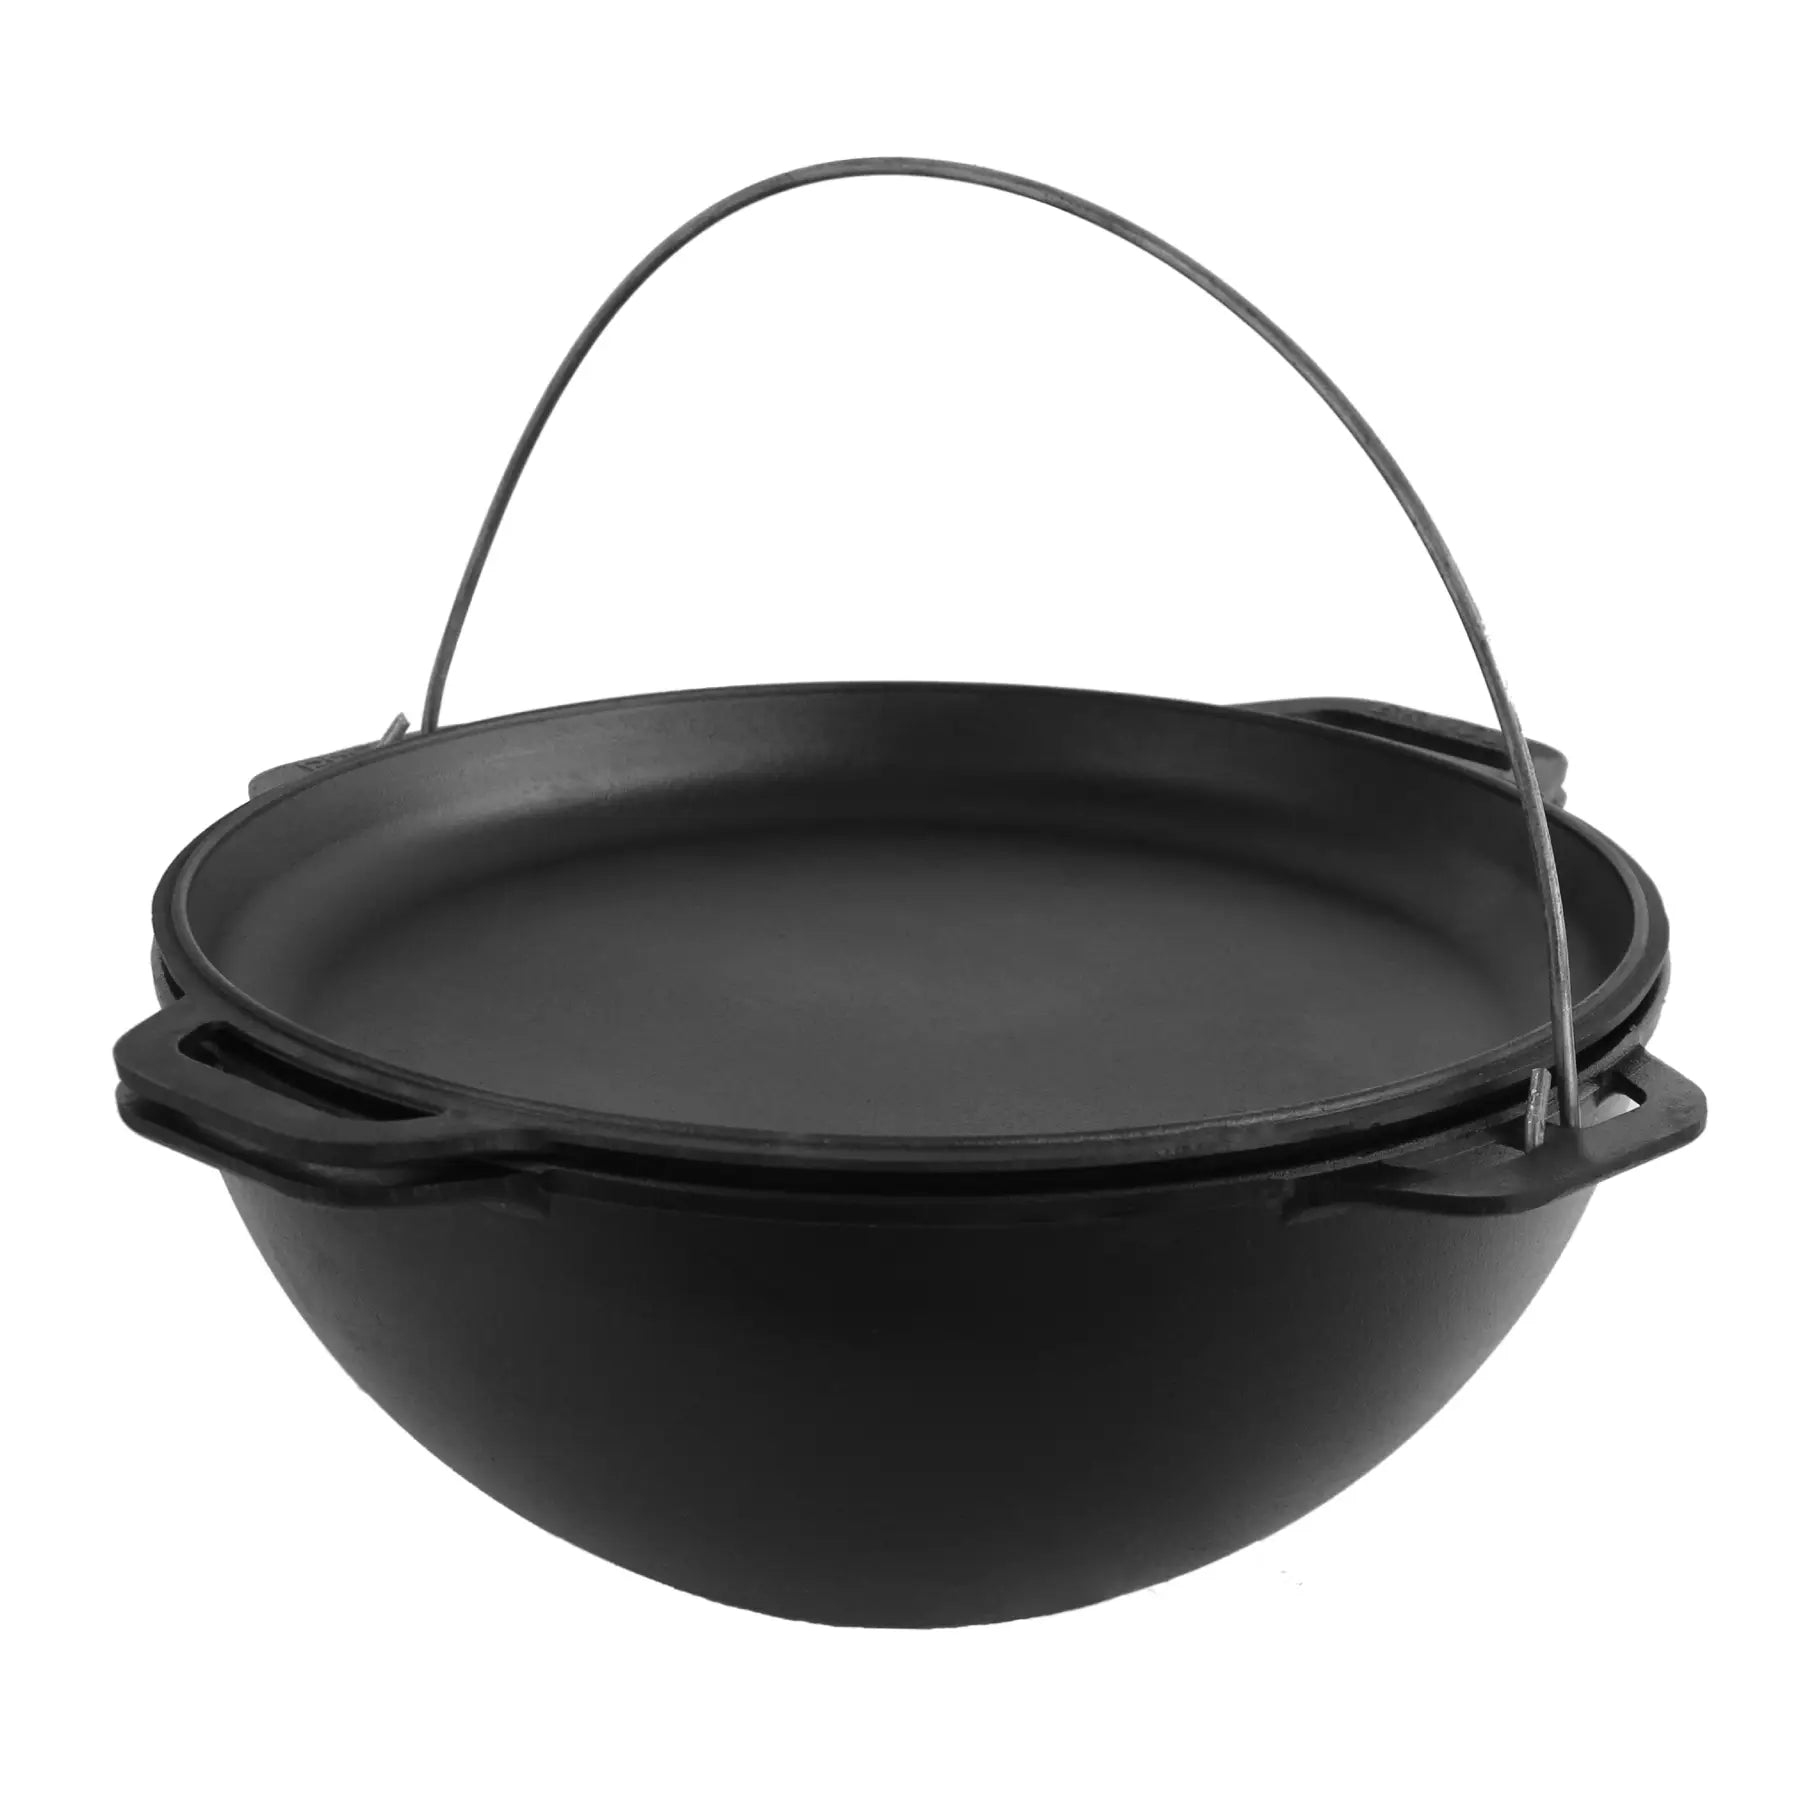 Cast Iron Braiser with a Frying Pan Lid Brizoll, Dutch Oven 15 L